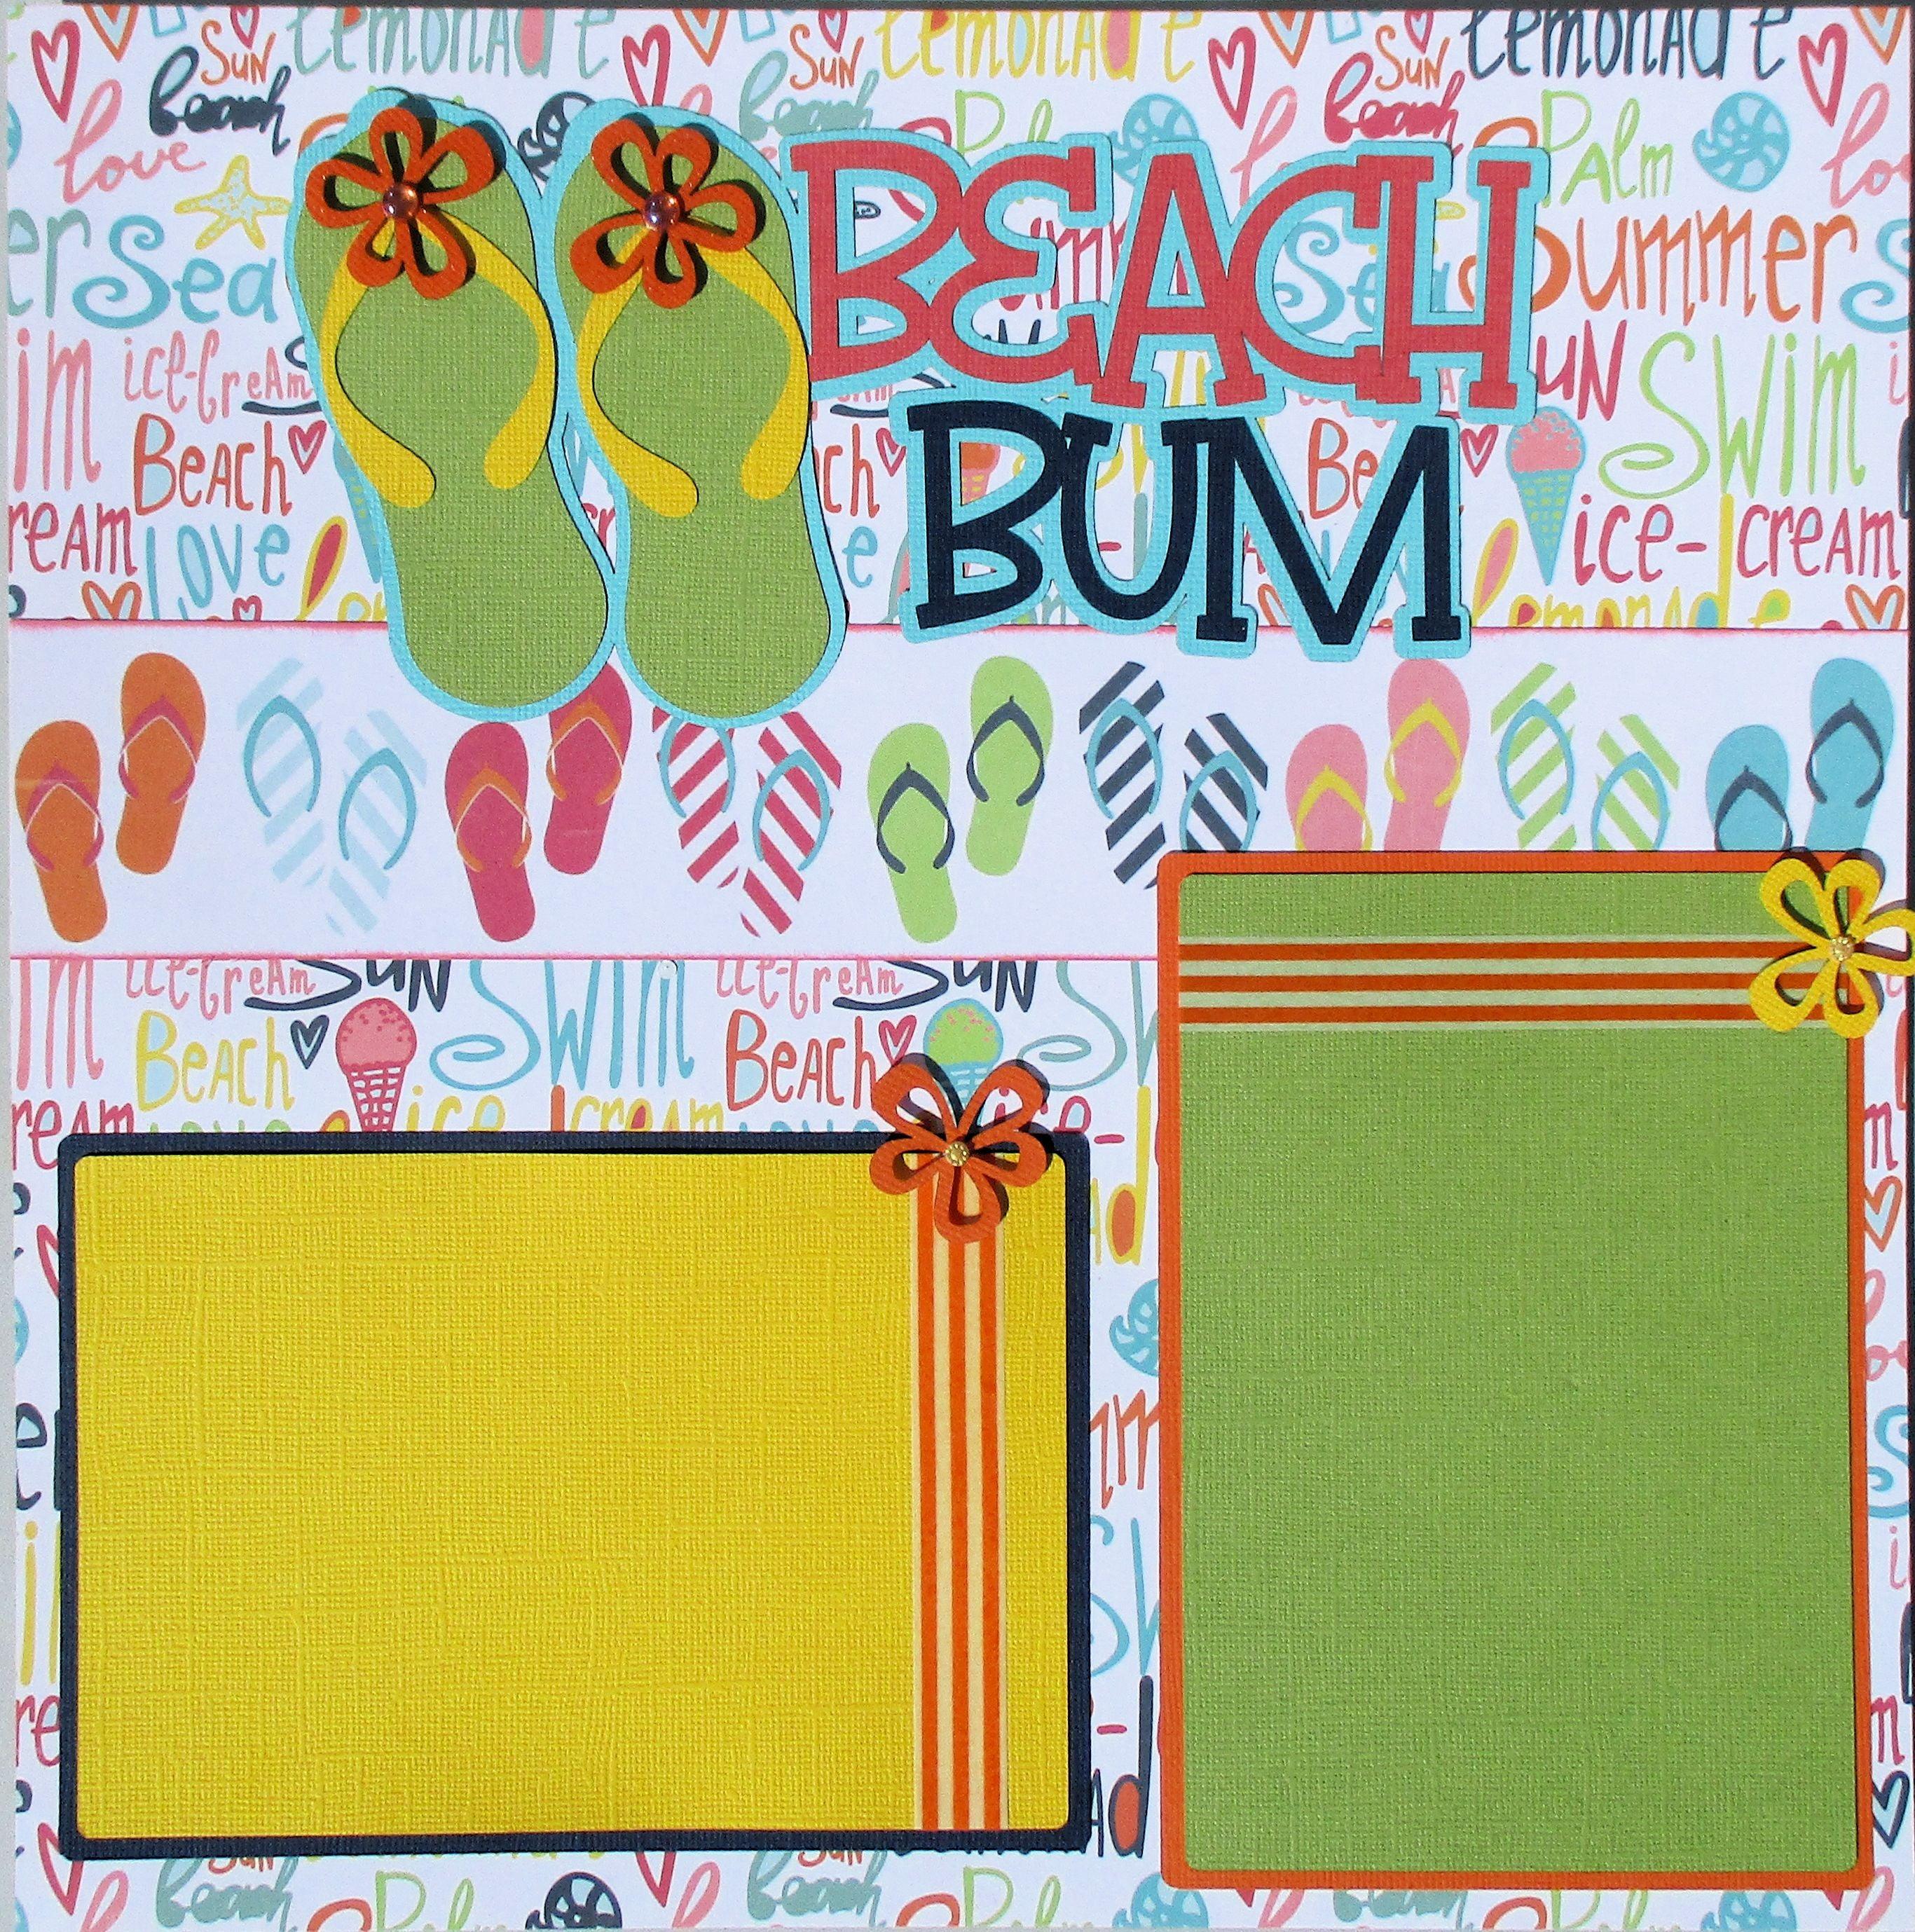 Beach Bum Premade Embellished Two-Page 12 x 12 Scrapbook Premade by SSC Designs - Scrapbook Supply Companies